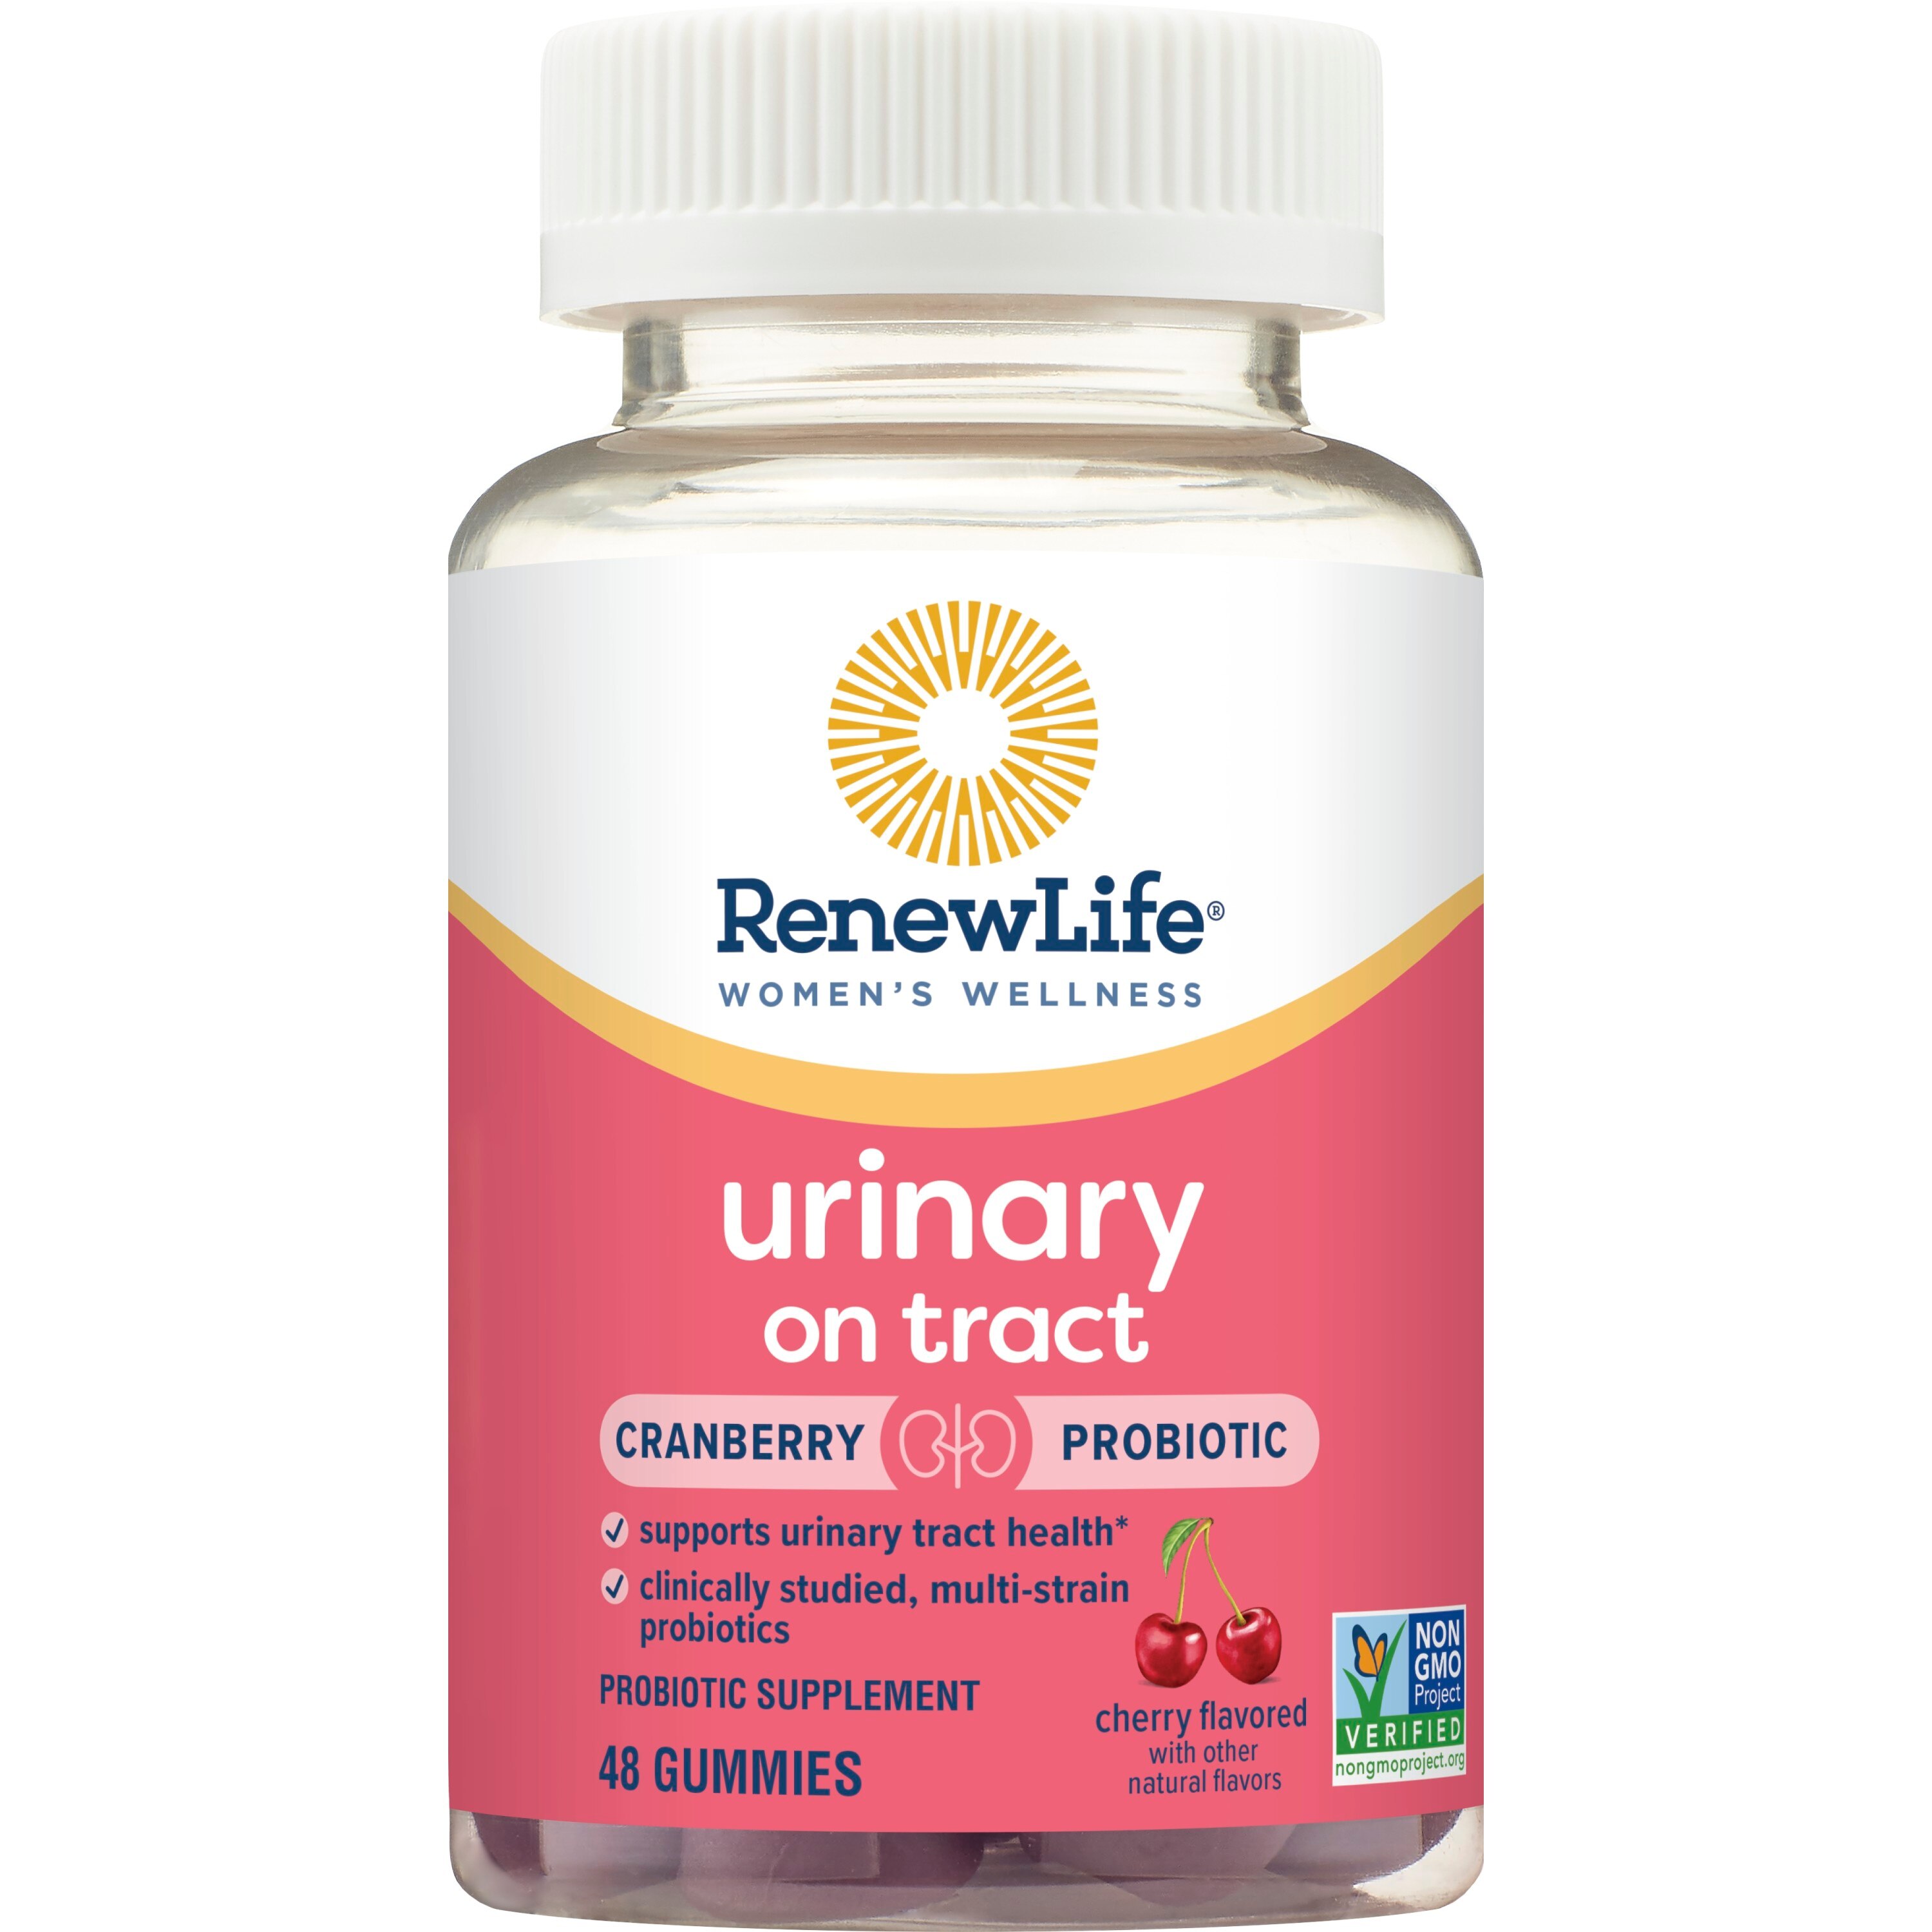 Renew Life Women's Wellness Urinary on Tract Probiotic Supplement with Cranberry, Promotes Immune Health, Urinary Tract Health and Digestive Health, 48 Probiotic Gummies, 2 Billion CFU